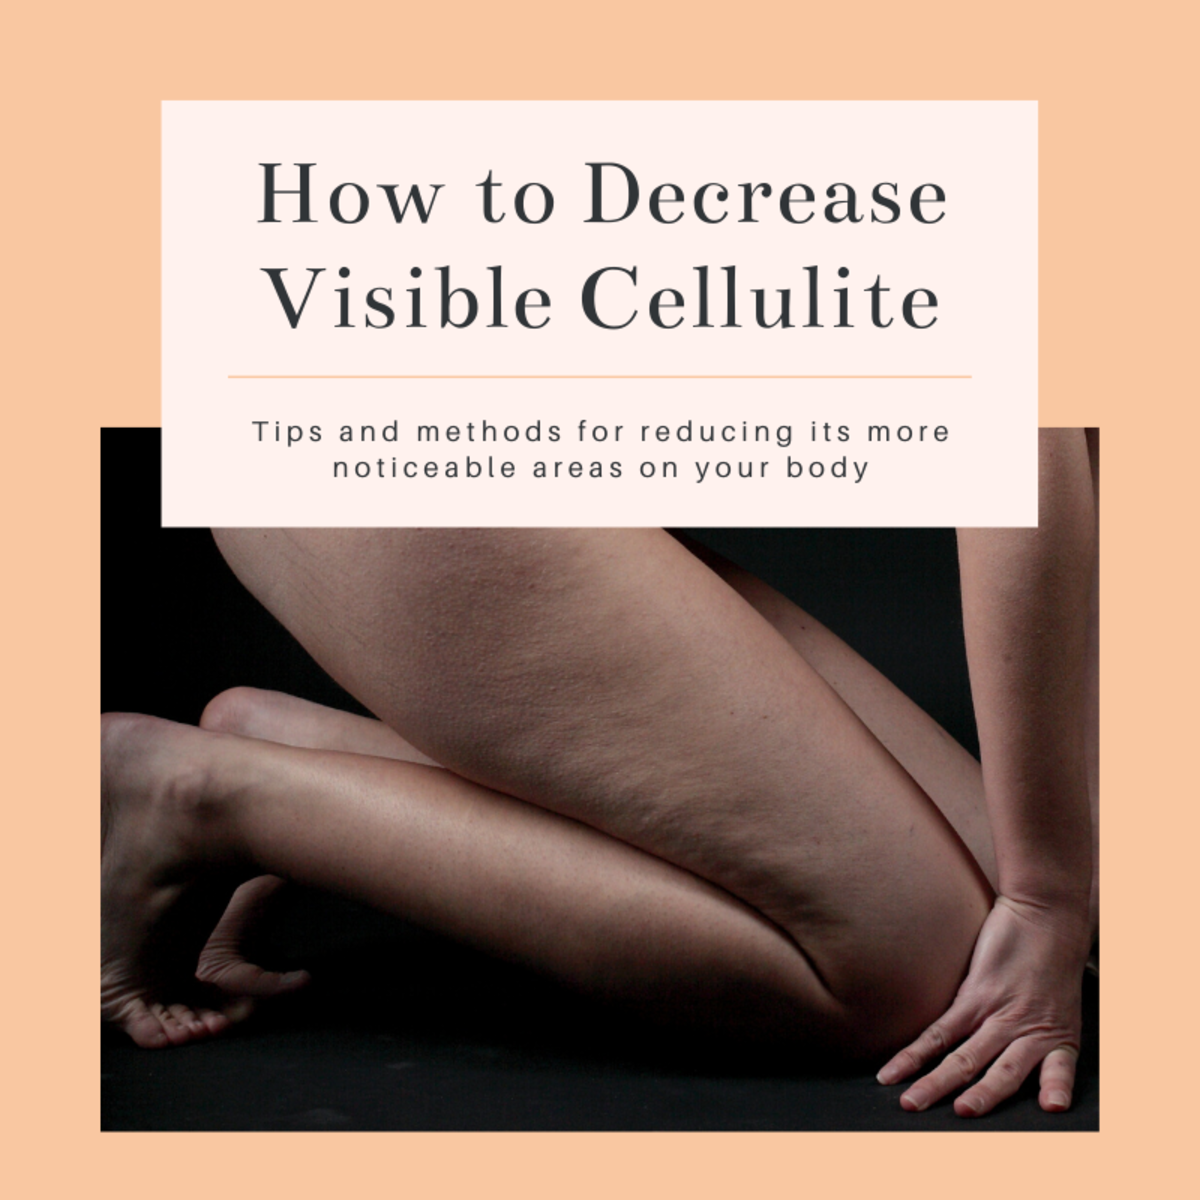 This article will break down some methods for you to potentially reduce the amount of visible cellulite on your body.